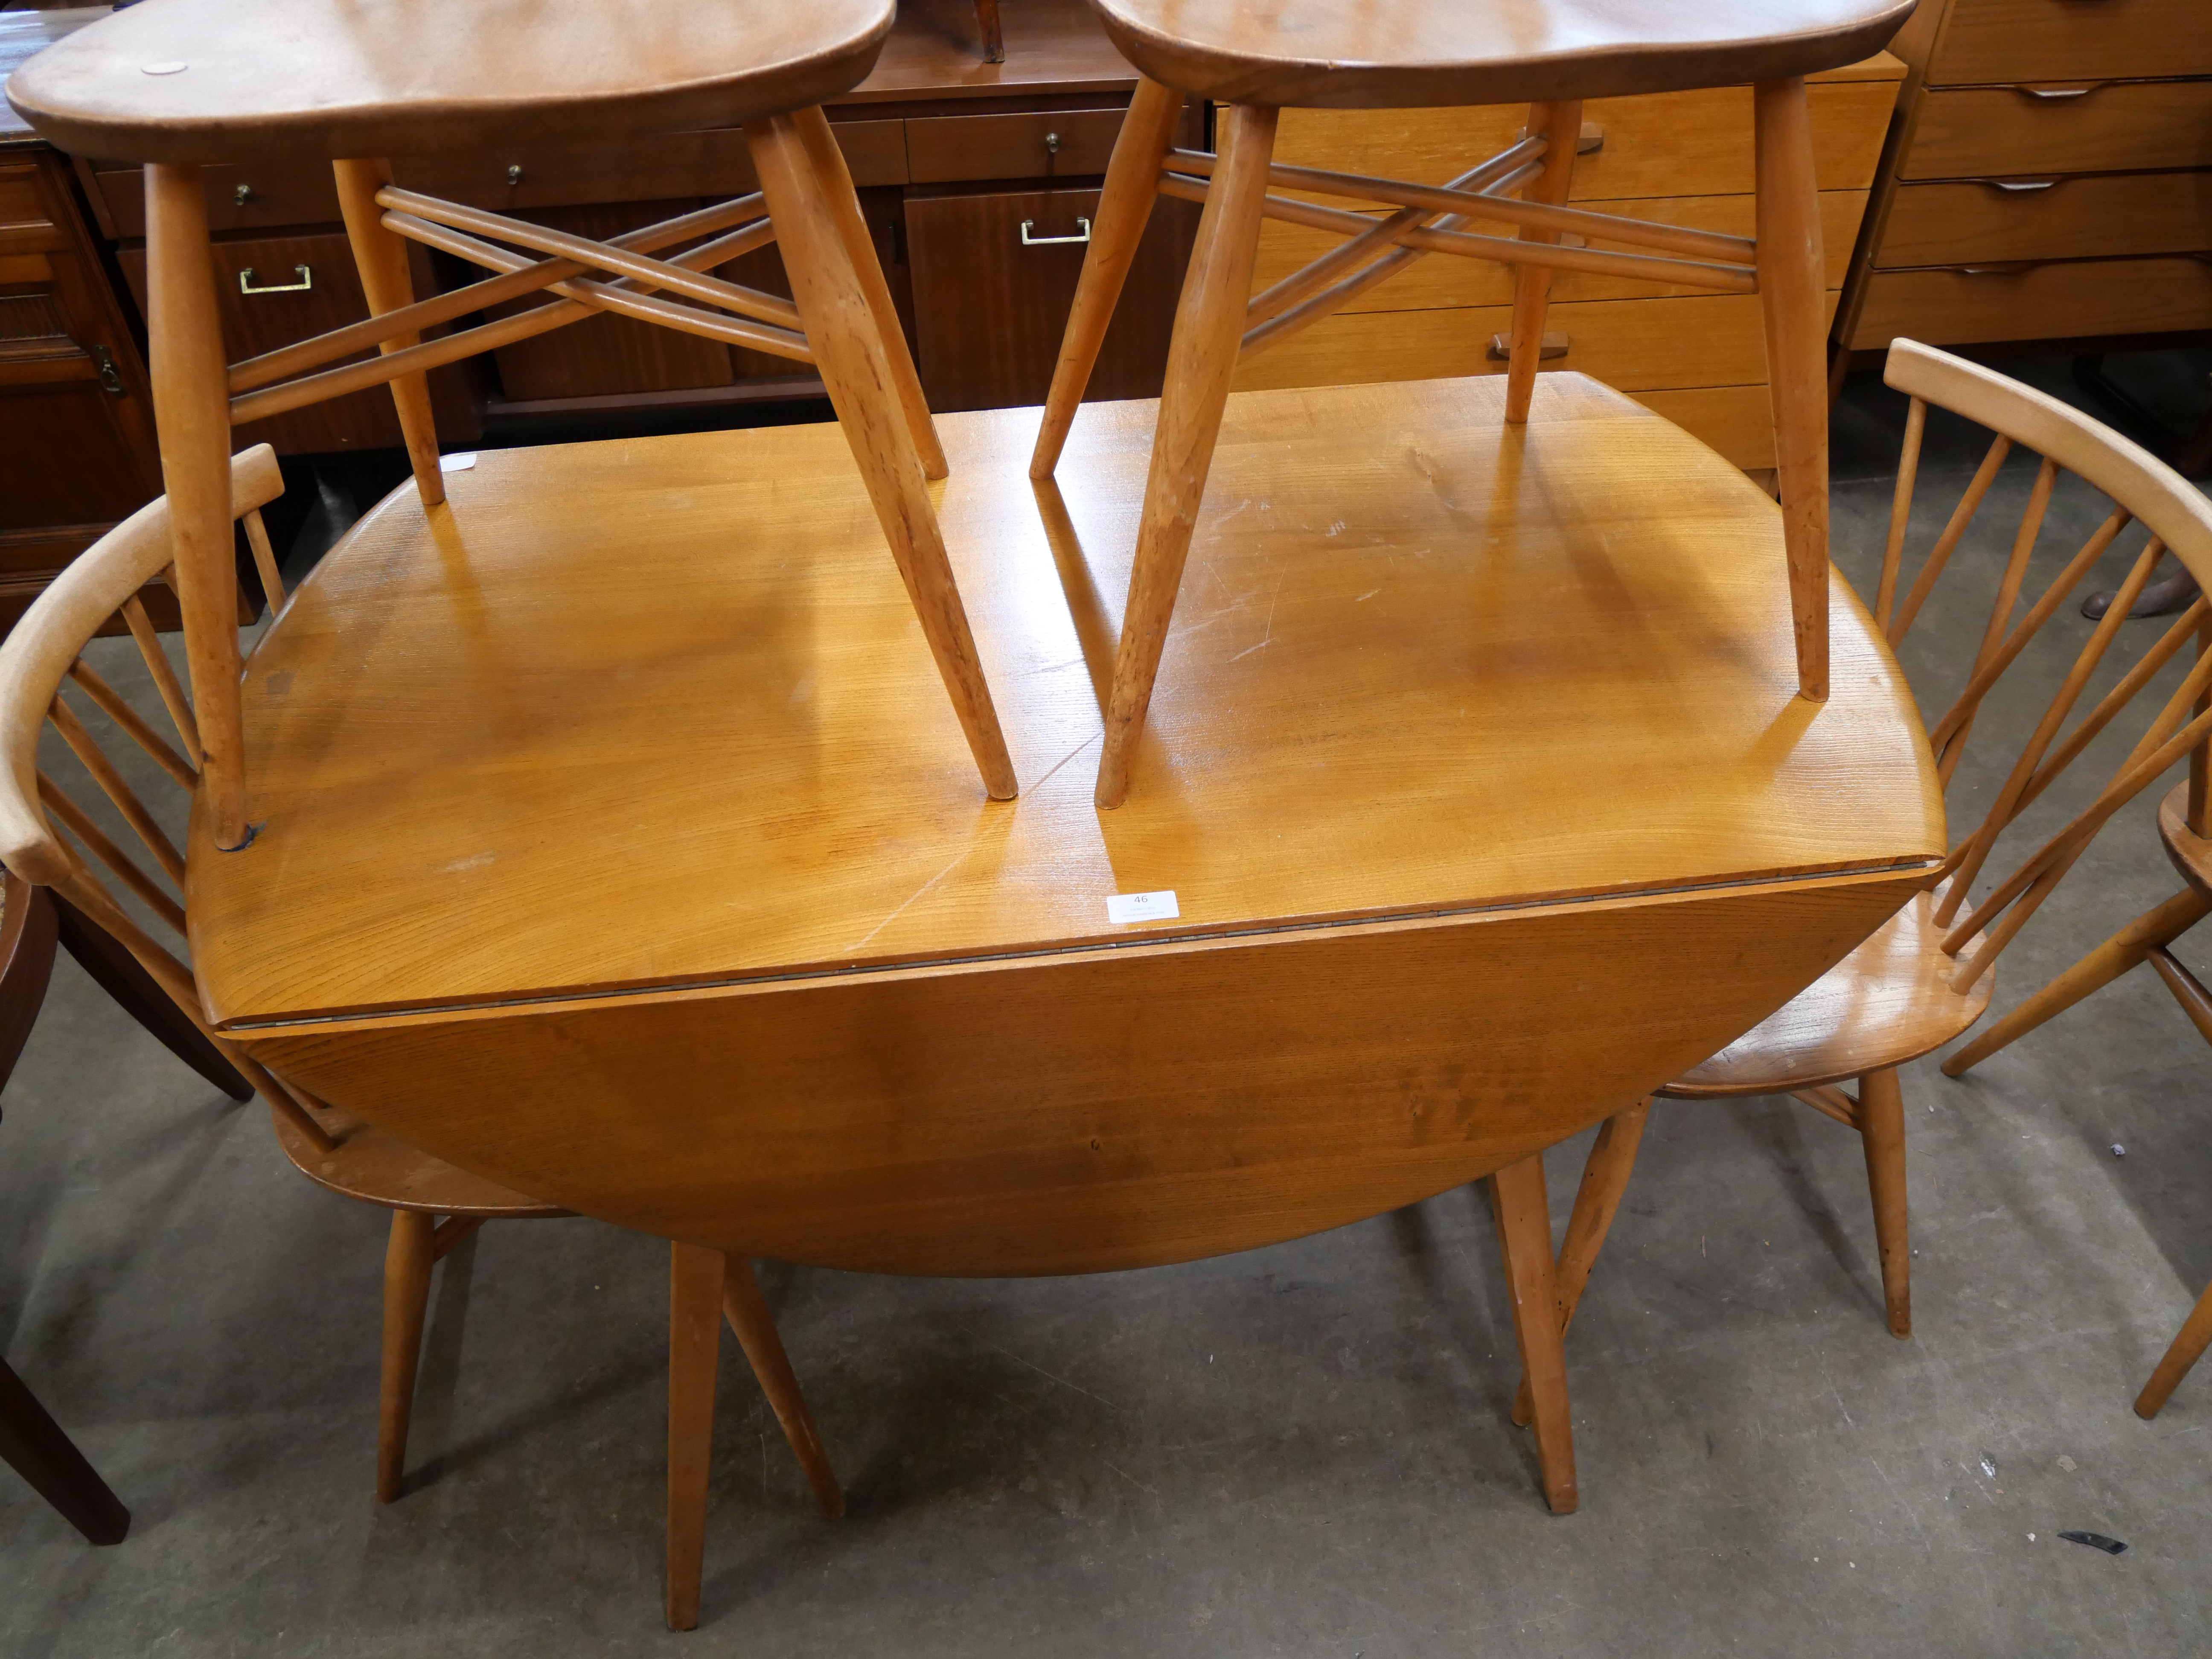 An Ercol Blonde elm and beech Windsor drop leaf table and four candlestick back chairs - Image 2 of 3